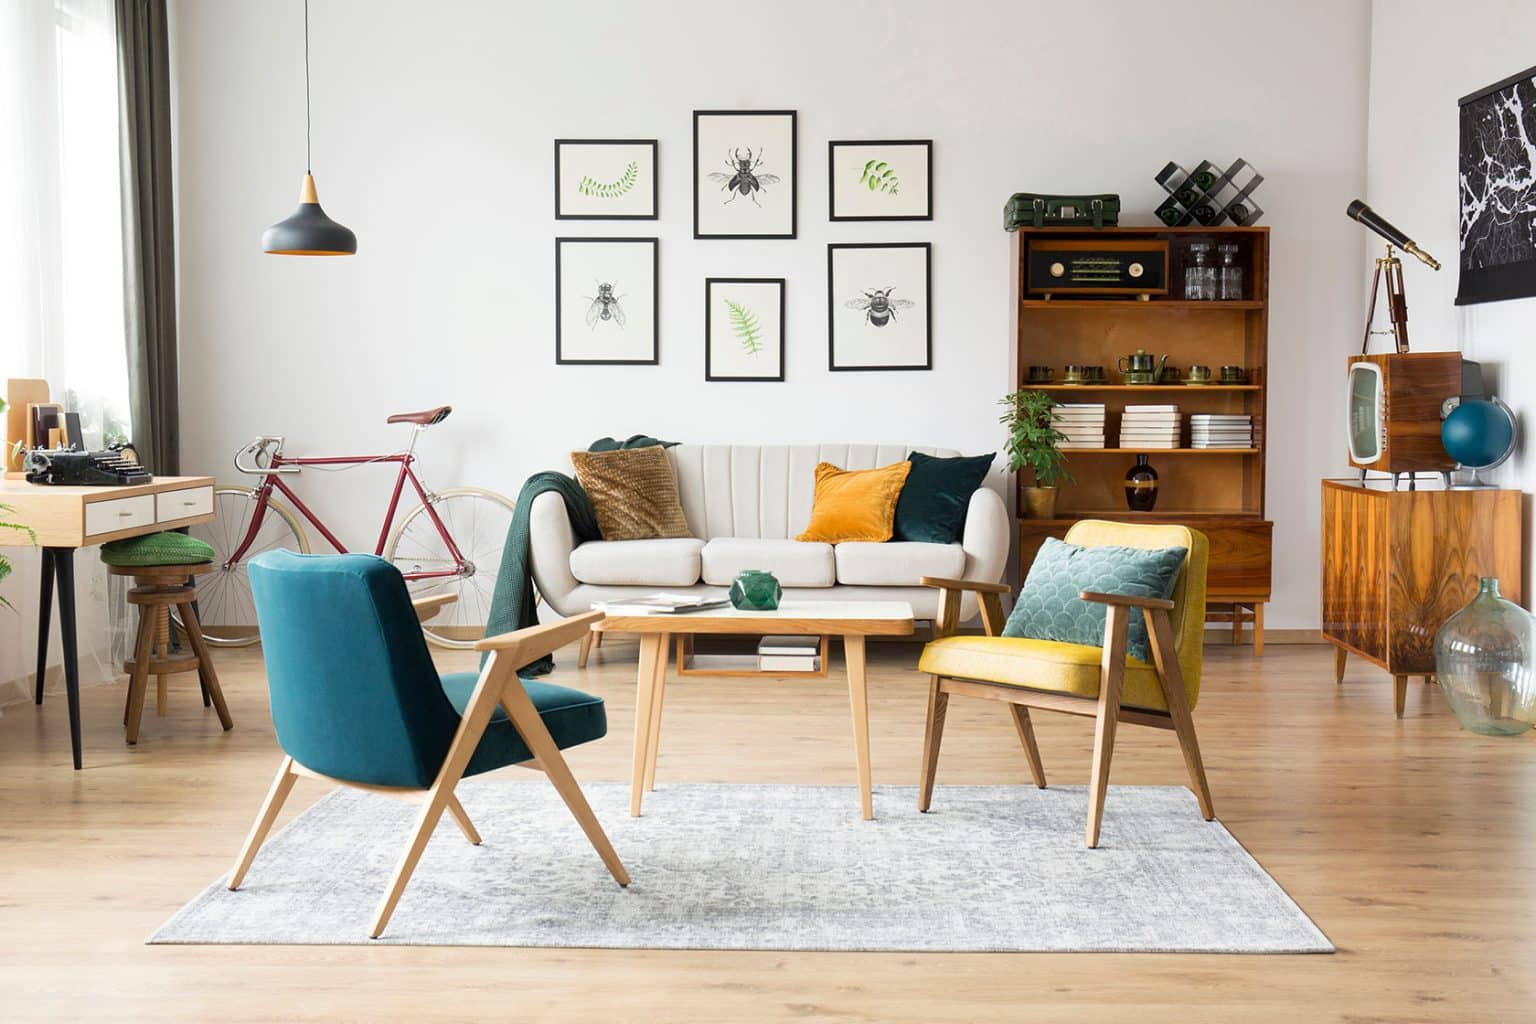 12 Best Interior Designers For Small Apartments In New York